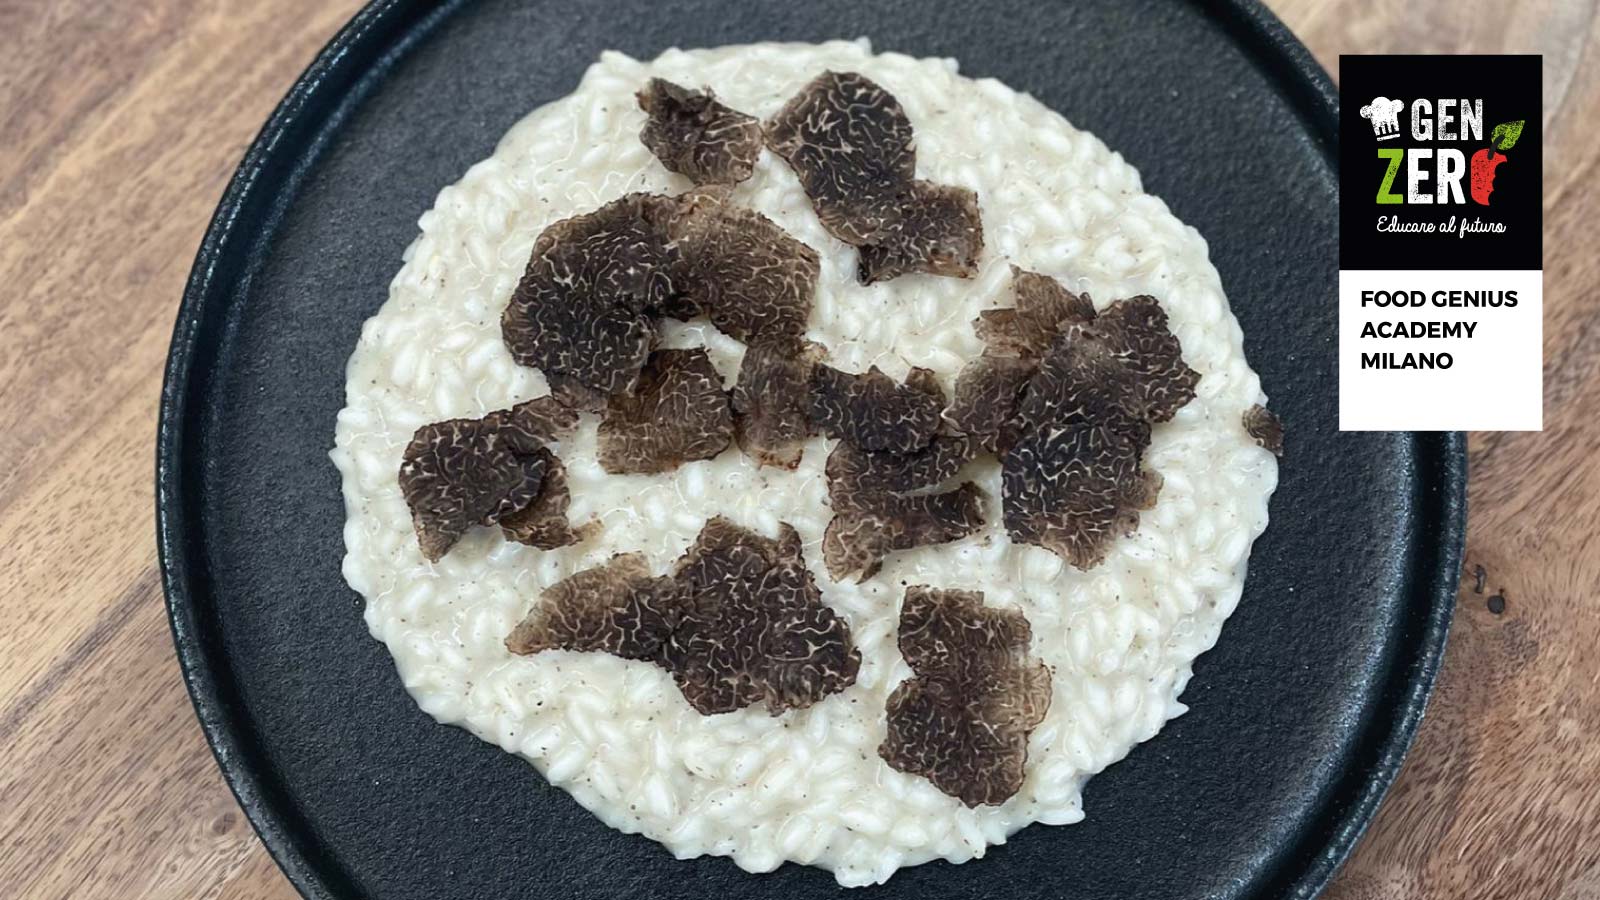 Food Genius Academy – Milano Risotto Cooked With Parmesan Water And Creamed With Truffle Butter